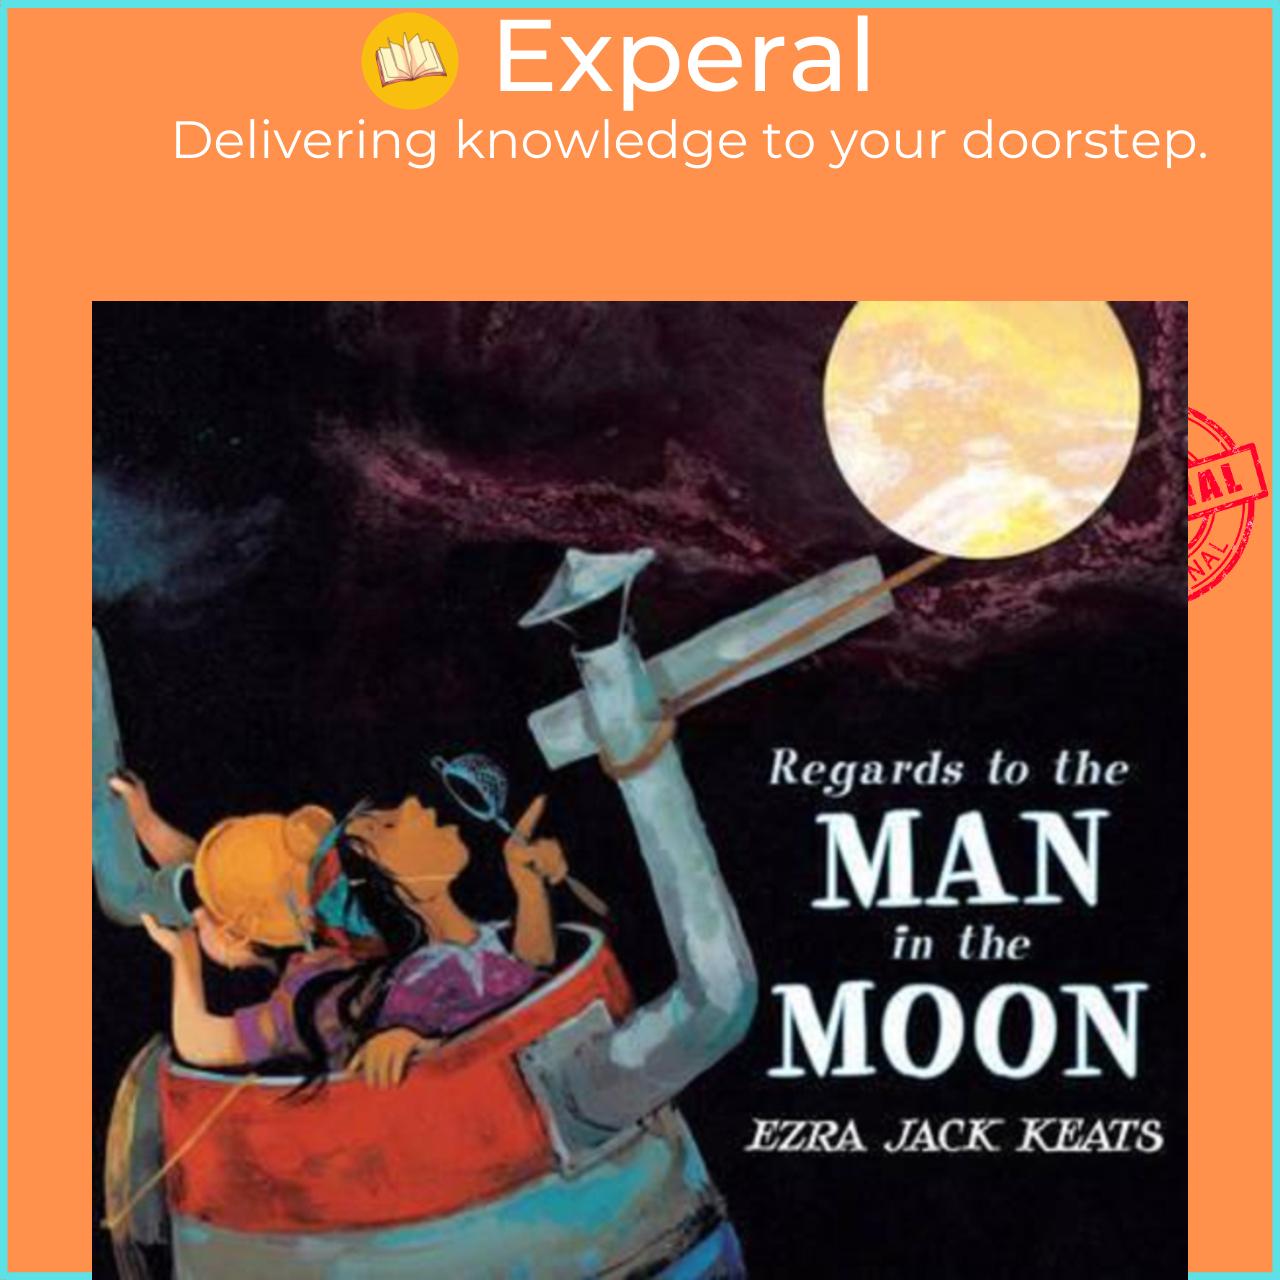 Sách - Regards to the Man in the Moon by Ezra Jack Keats (US edition, hardcover)